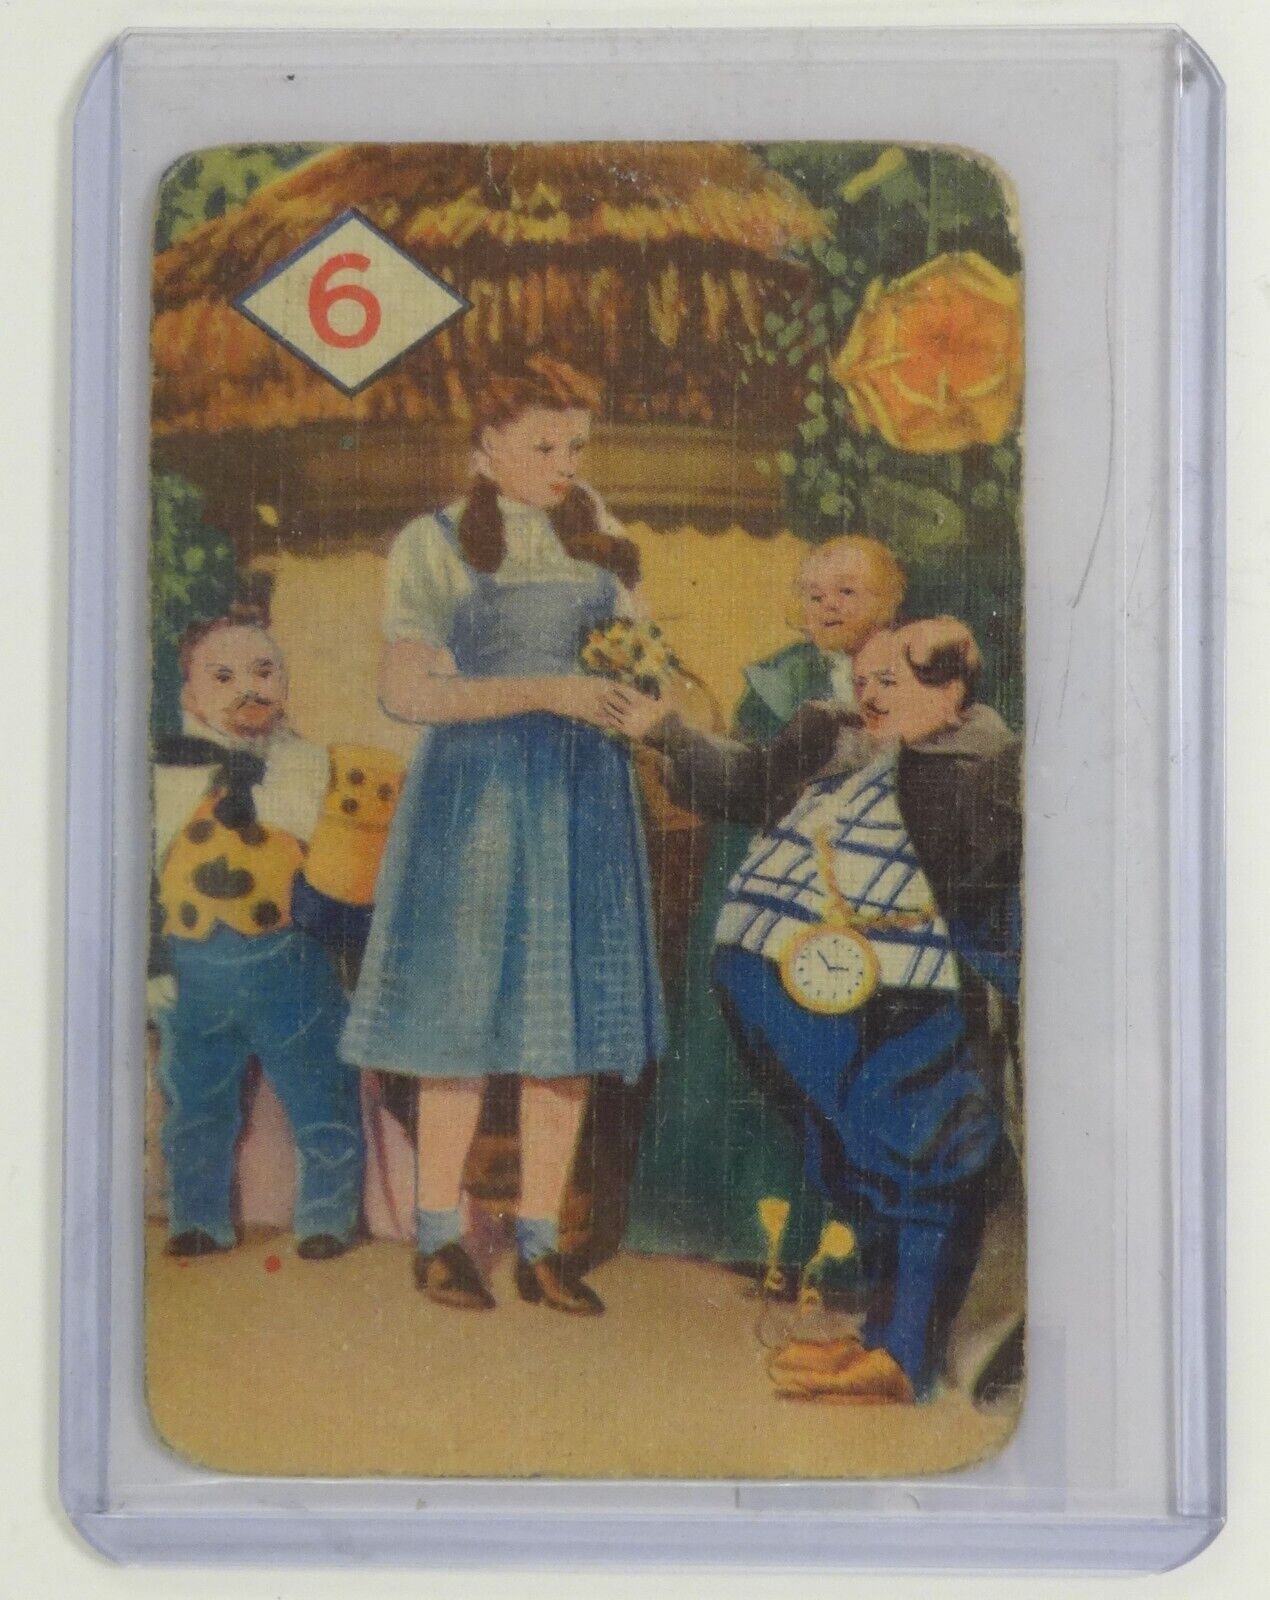 WIZARD OF OZ VINTAGE 1940 CASTELL CARD #6 DOROTHY & MUNCHKINS